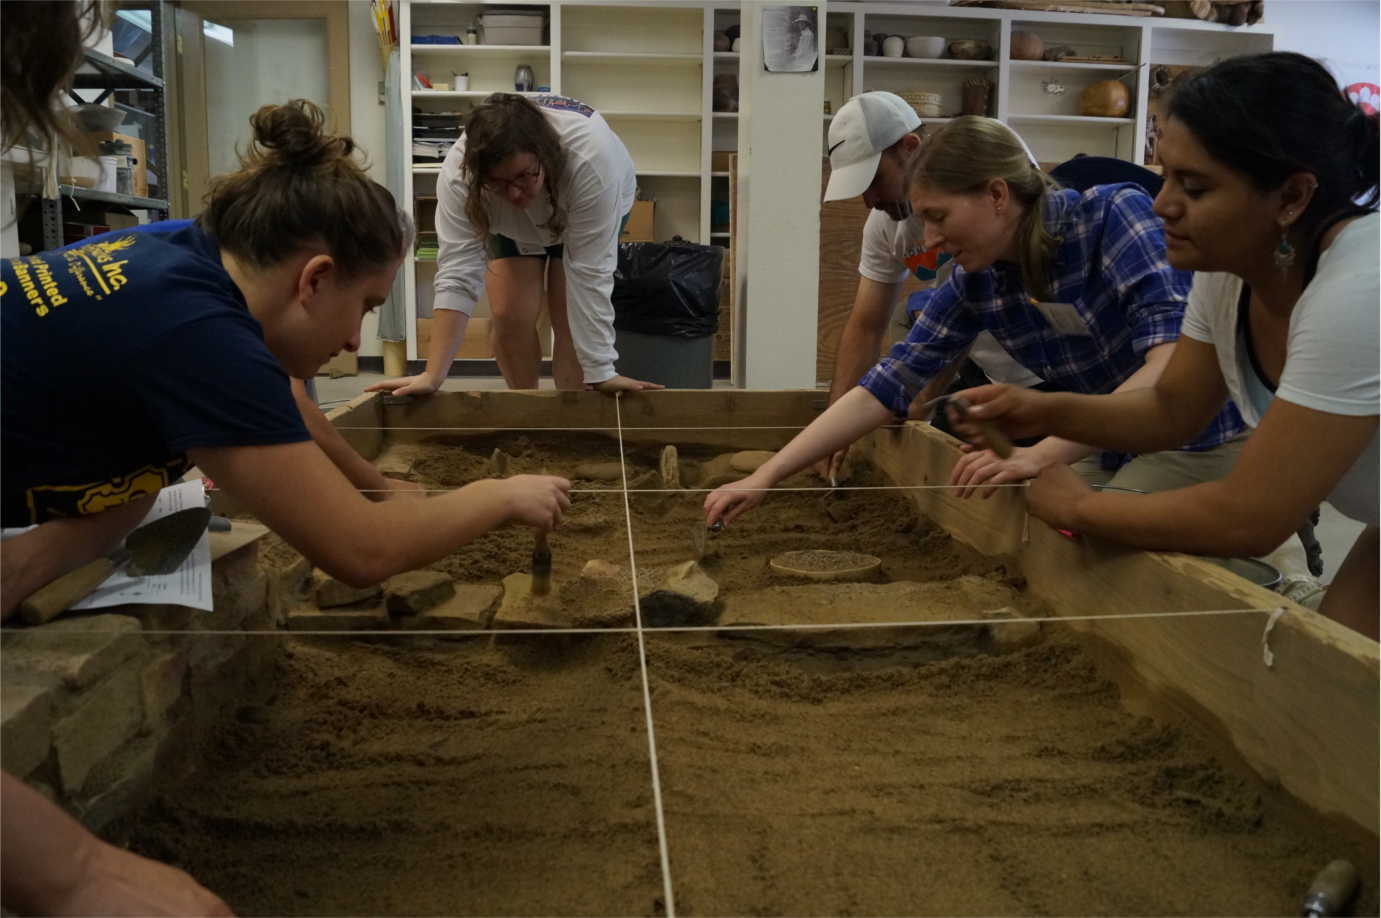 Teachers learn archaeological methods. Image courtesy of Crow Canyon Archaeological Center.